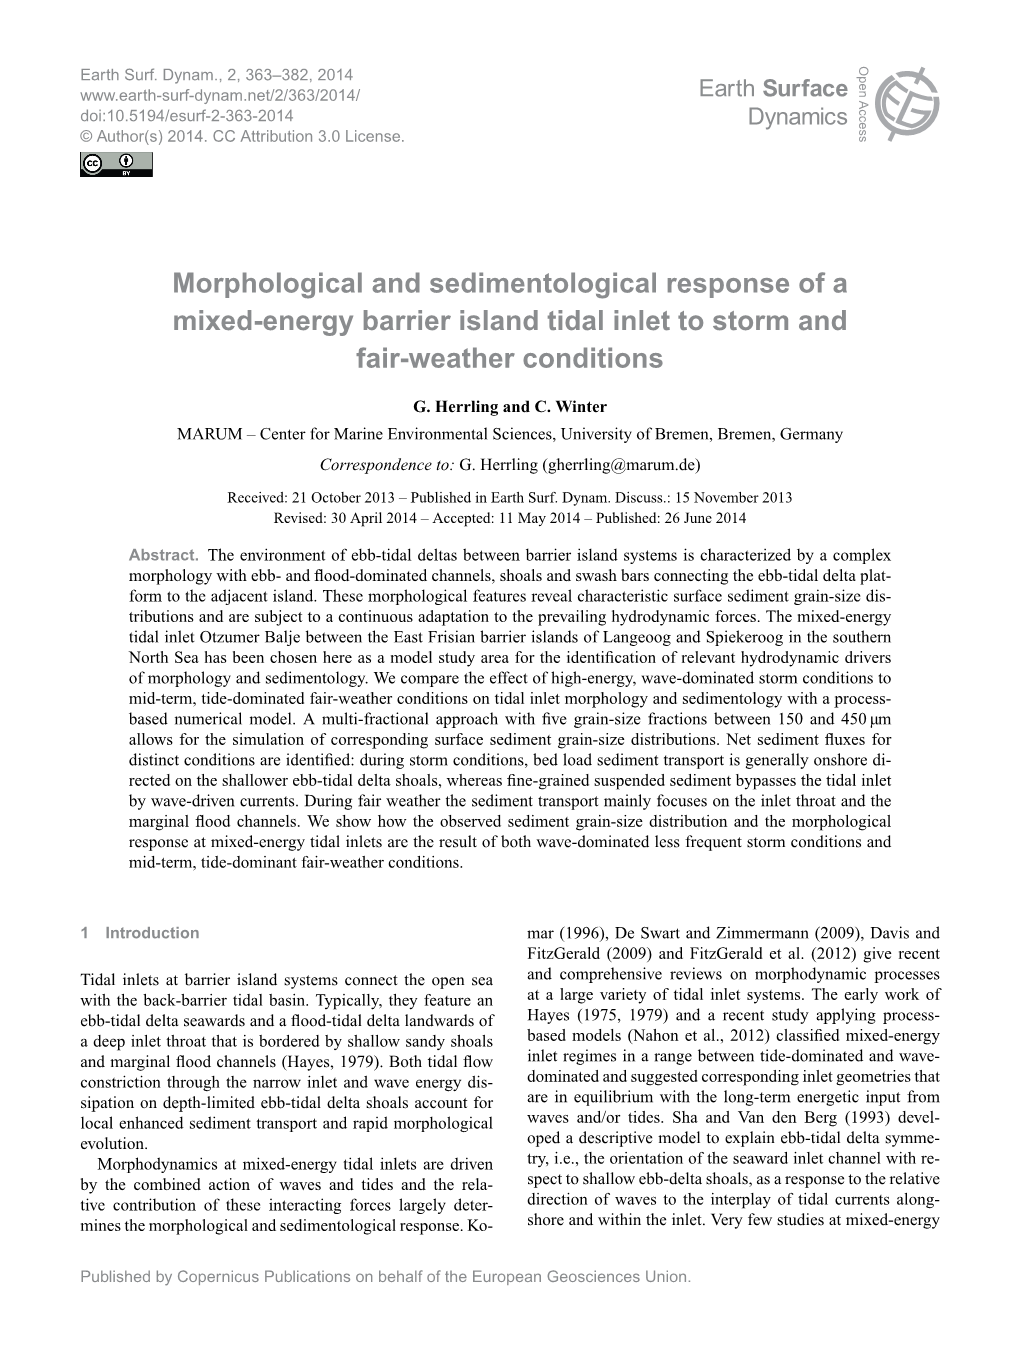 Morphological and Sedimentological Response of a Mixed-Energy Barrier Island Tidal Inlet to Storm and Fair-Weather Conditions